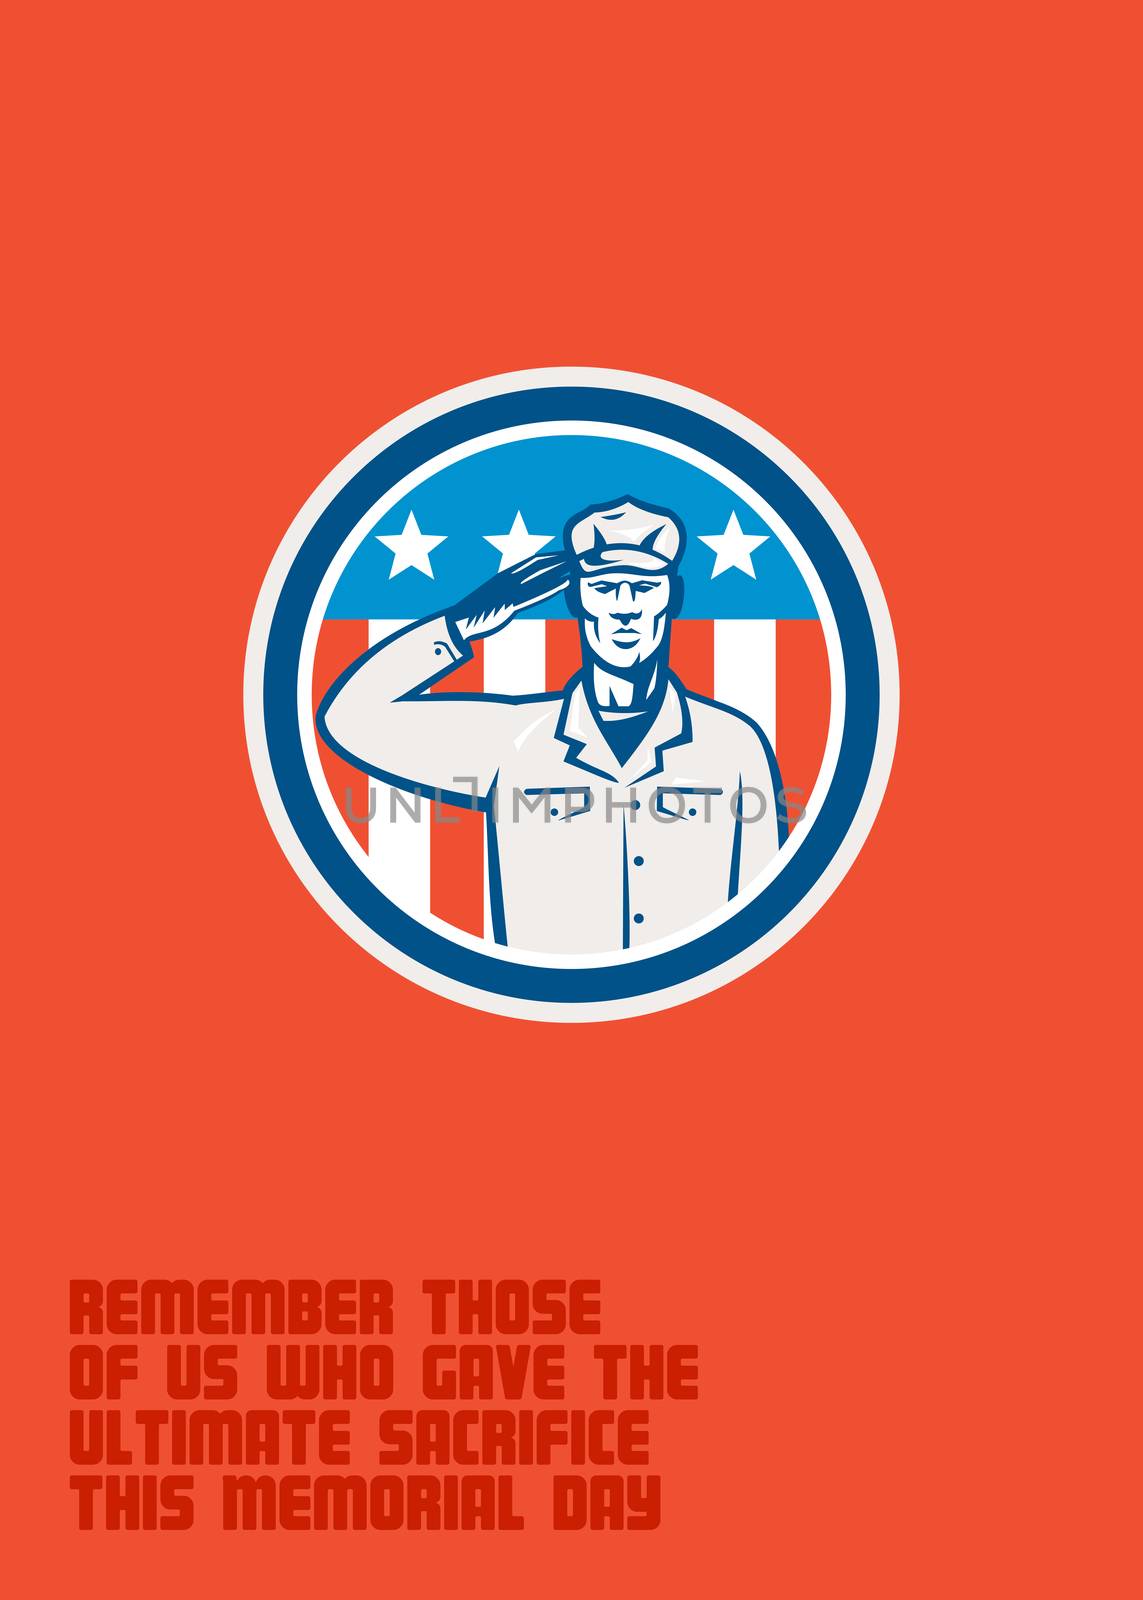 Memorial Day�greeting card featuring an illustration of an American soldier serviceman saluting with USA stars and stripes flag in the background set inside circle done in retro style with the words Remember Those of Us Who Gave The Ultimate Sacrifice This Memorial Day 